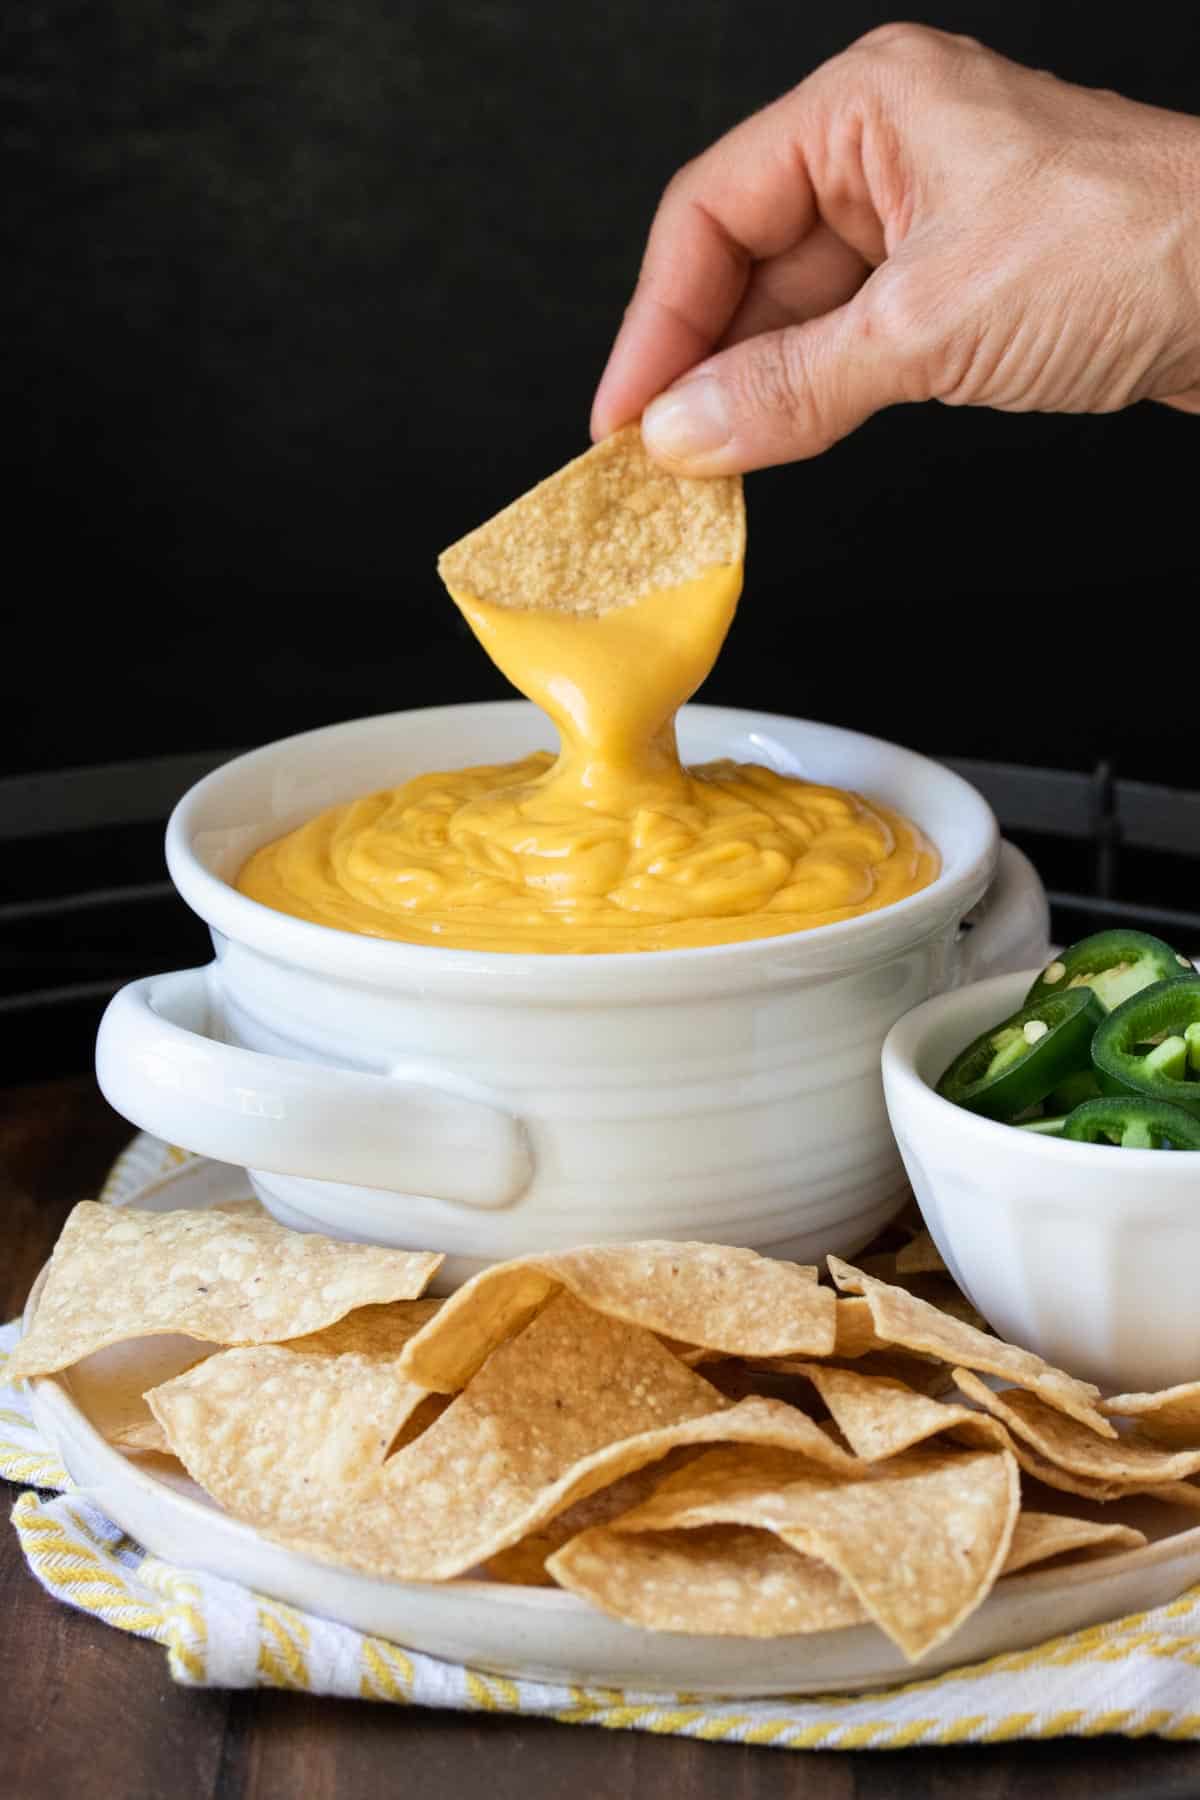 Hand dipping a chip in a bowl of orange cheese sauce.